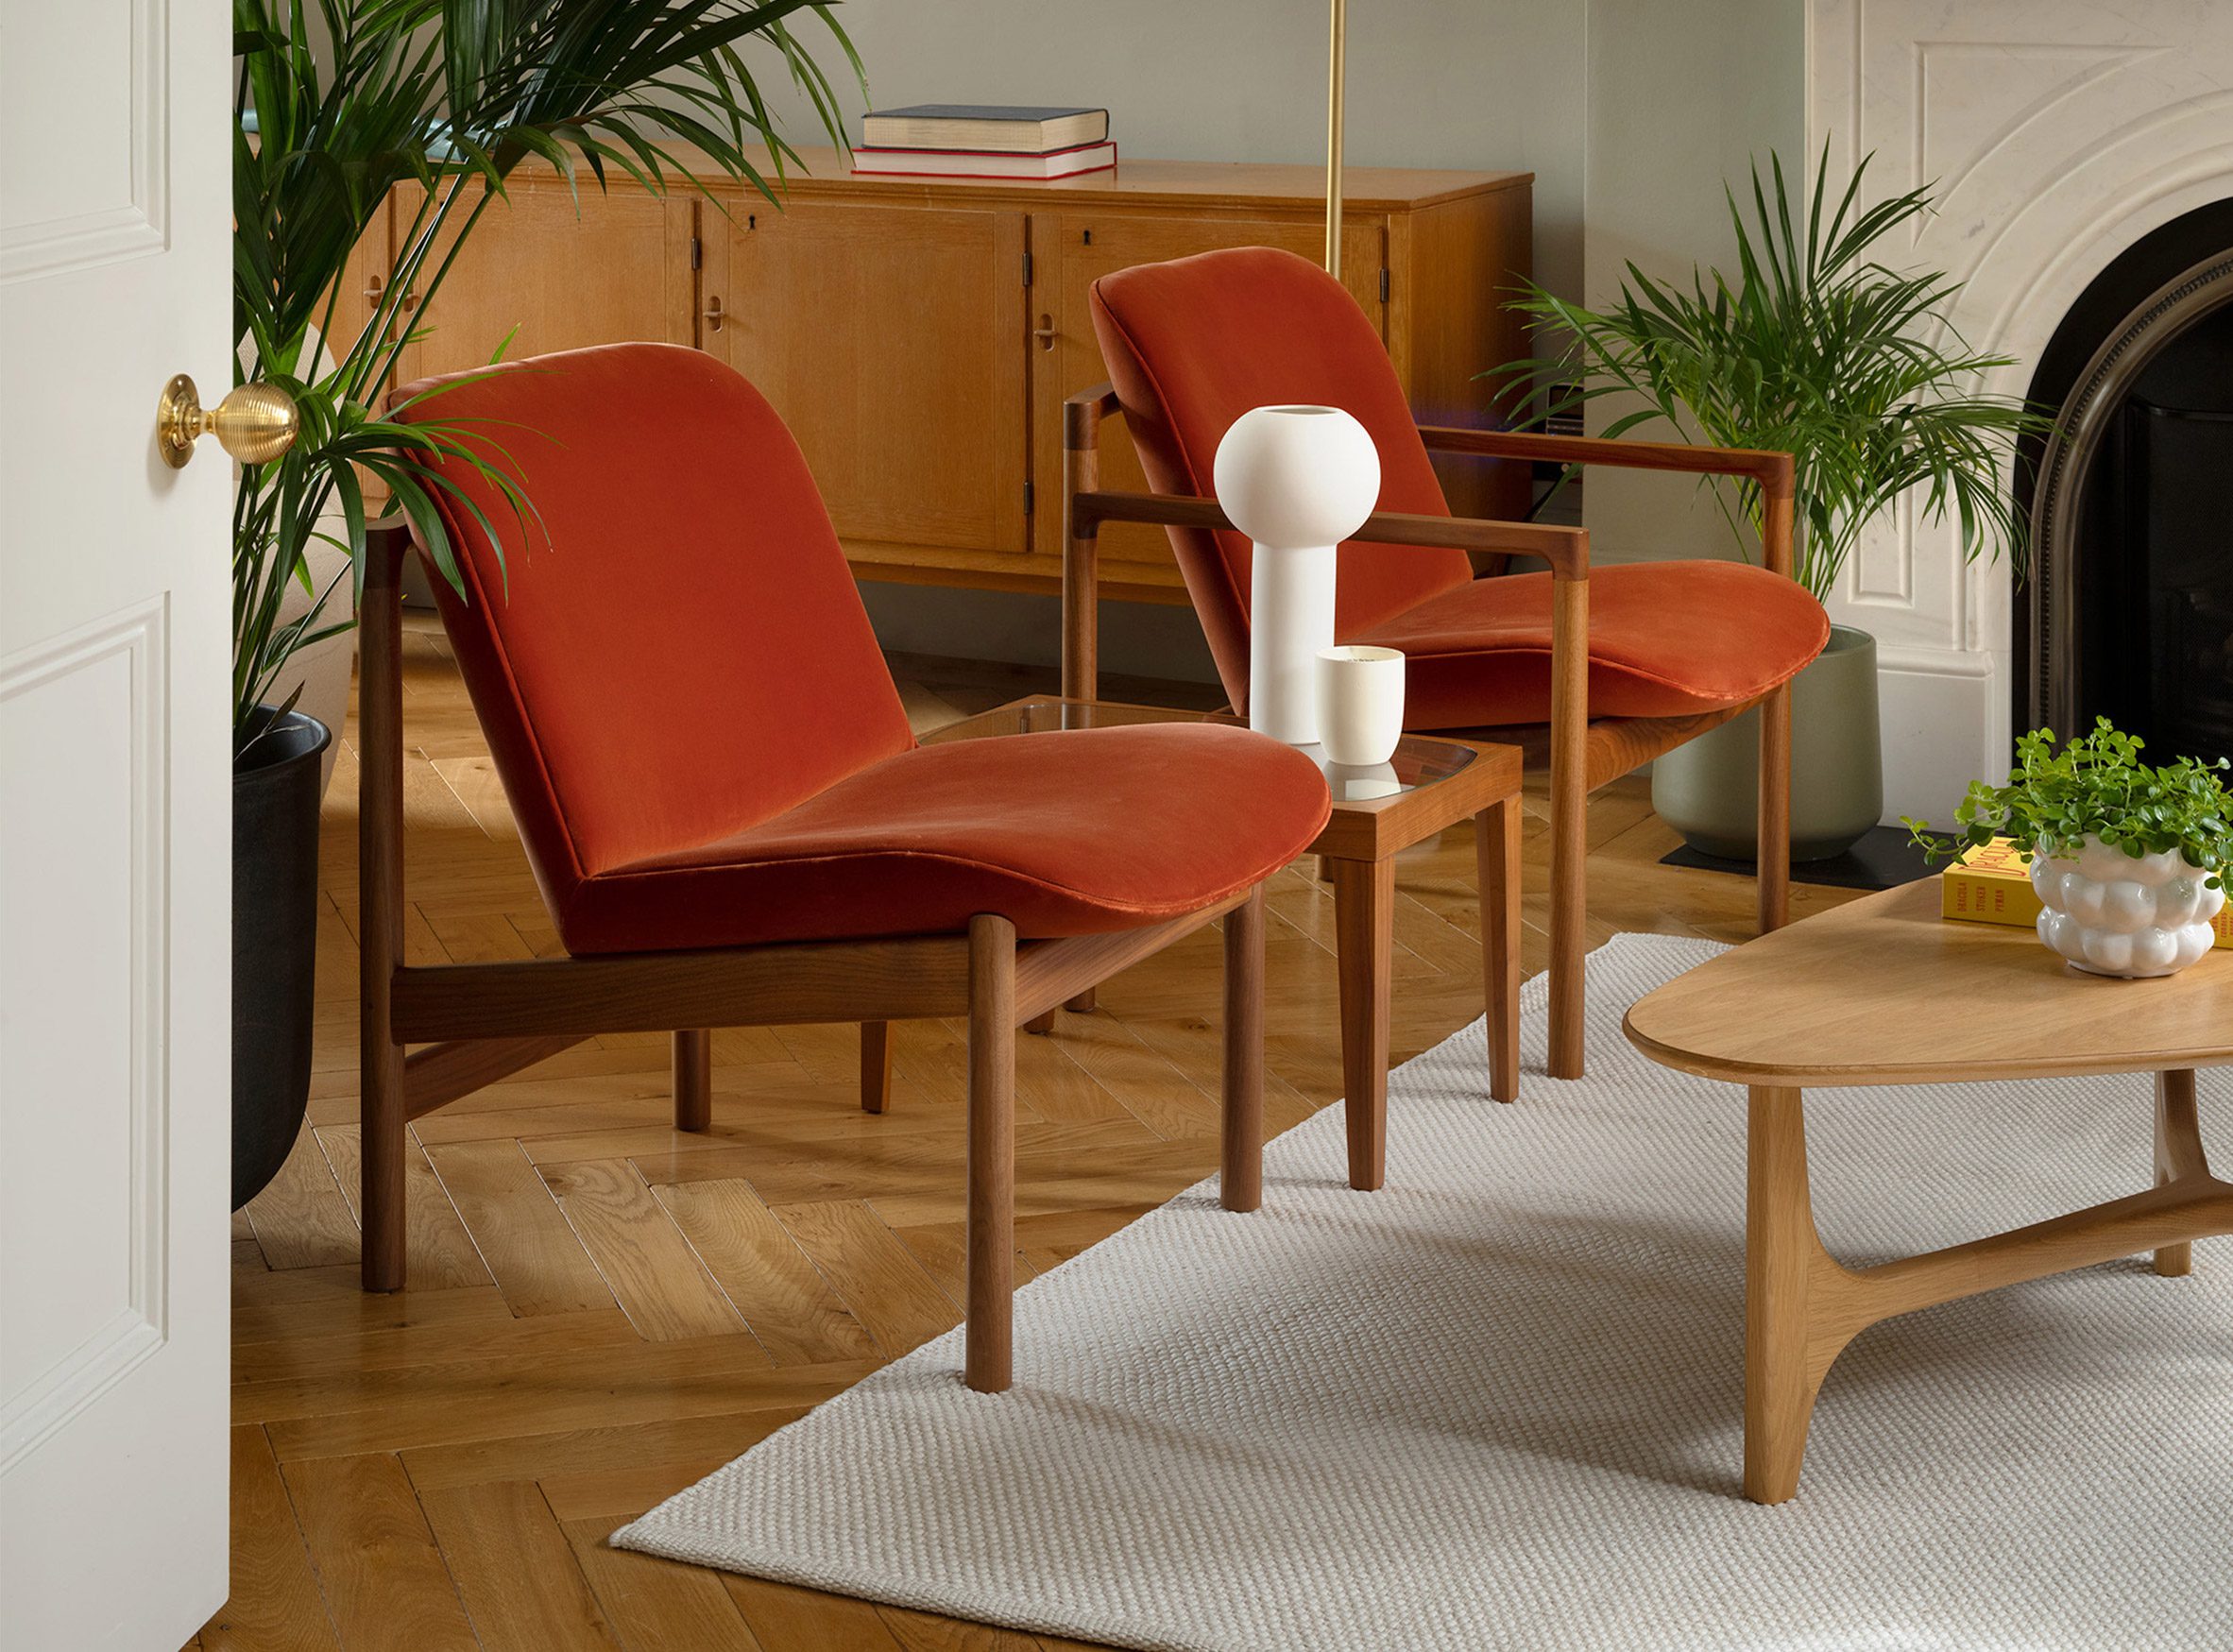 Photo of the Rakino chair by Tim Rundle for Morgan